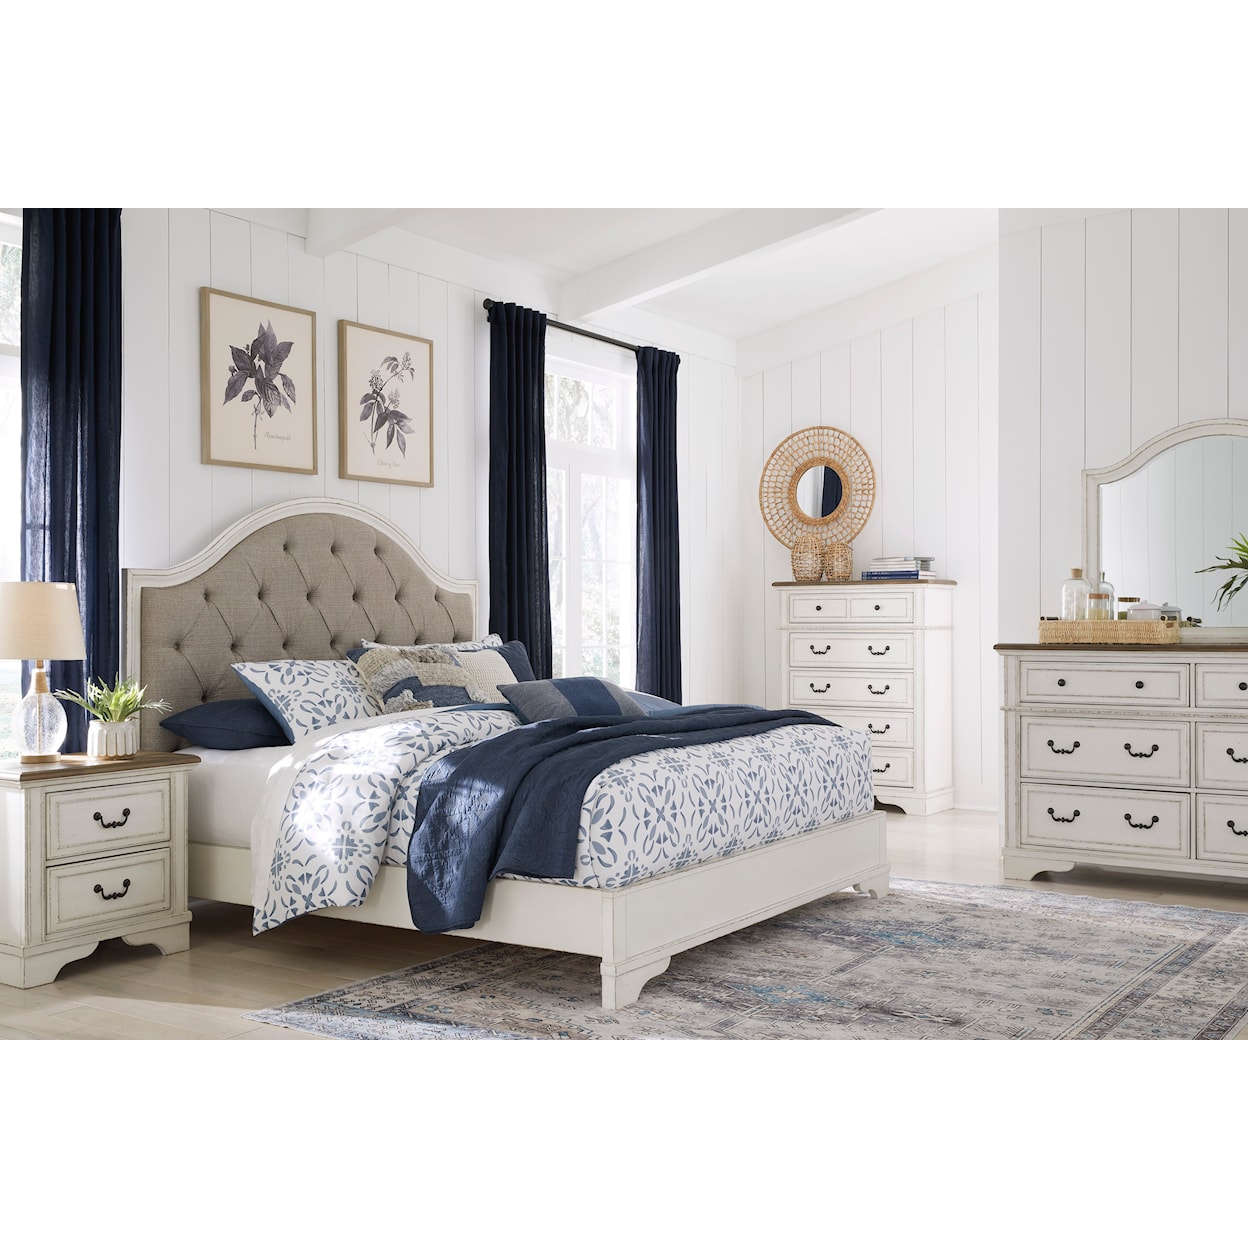 Signature Design by Ashley Brollyn King Bedroom Set